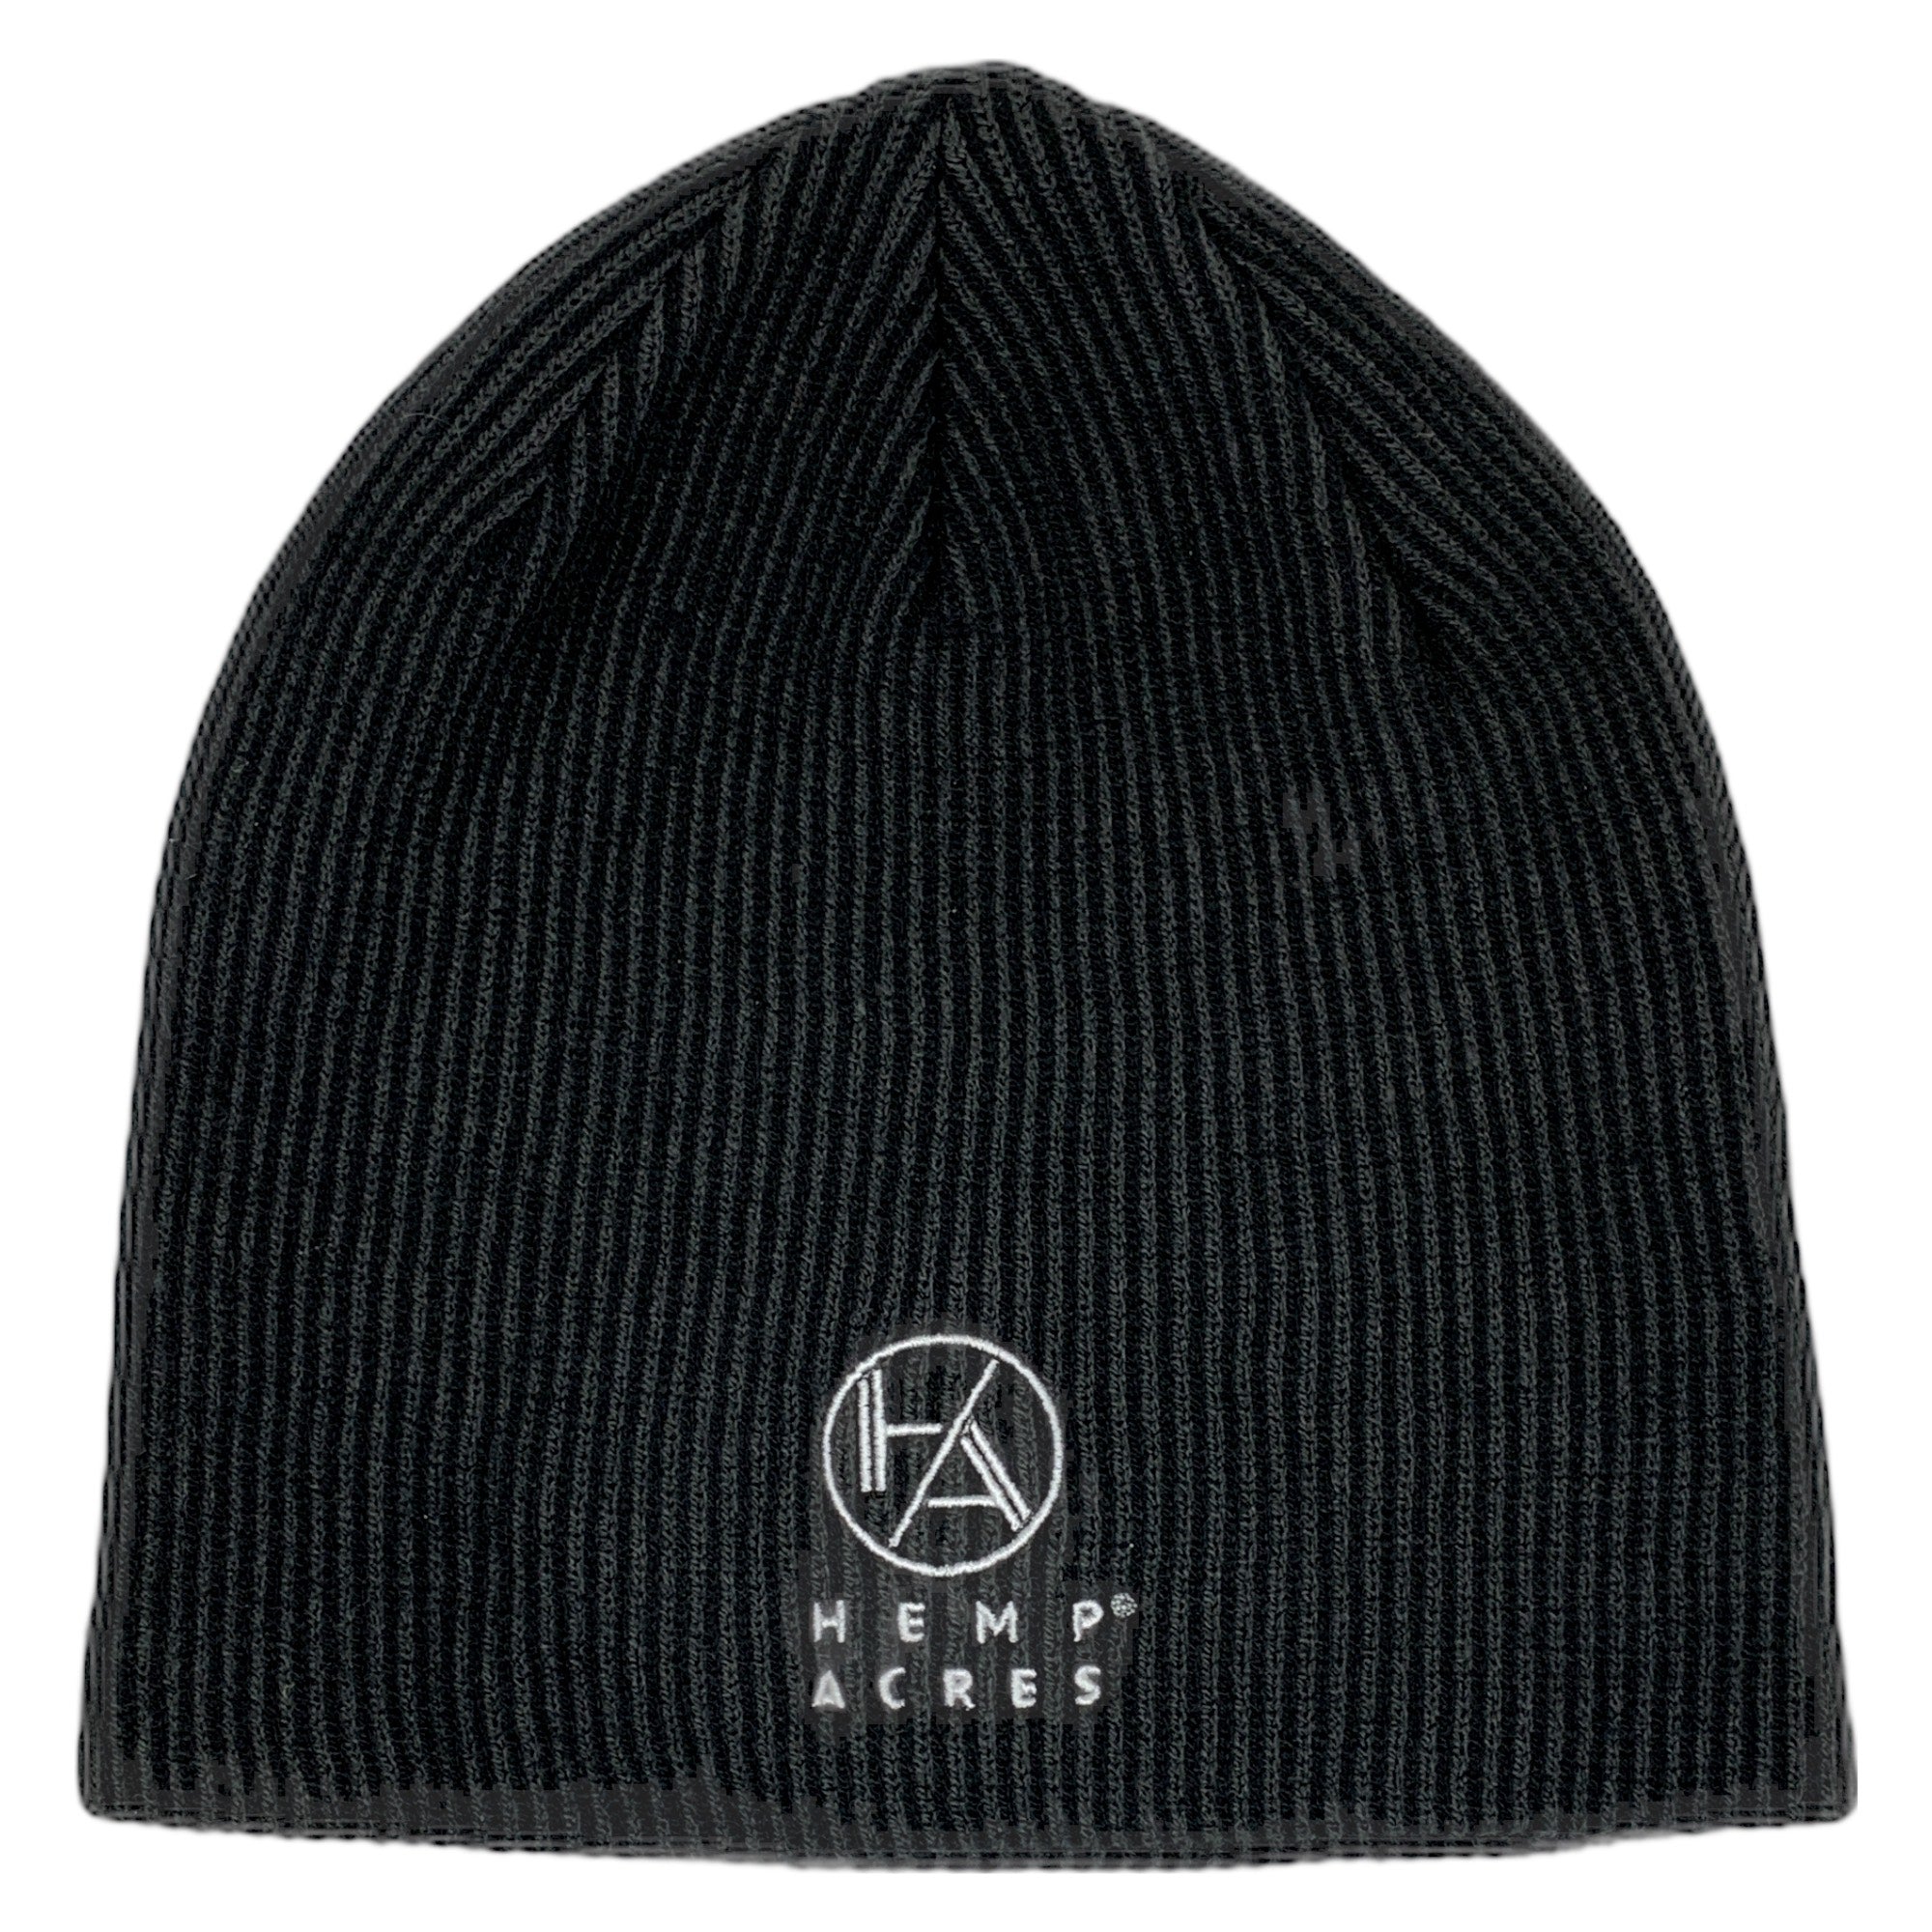 Black, ribbed beanie hat with Hemp Acres logo and the words Hemp Acres stitched on in white